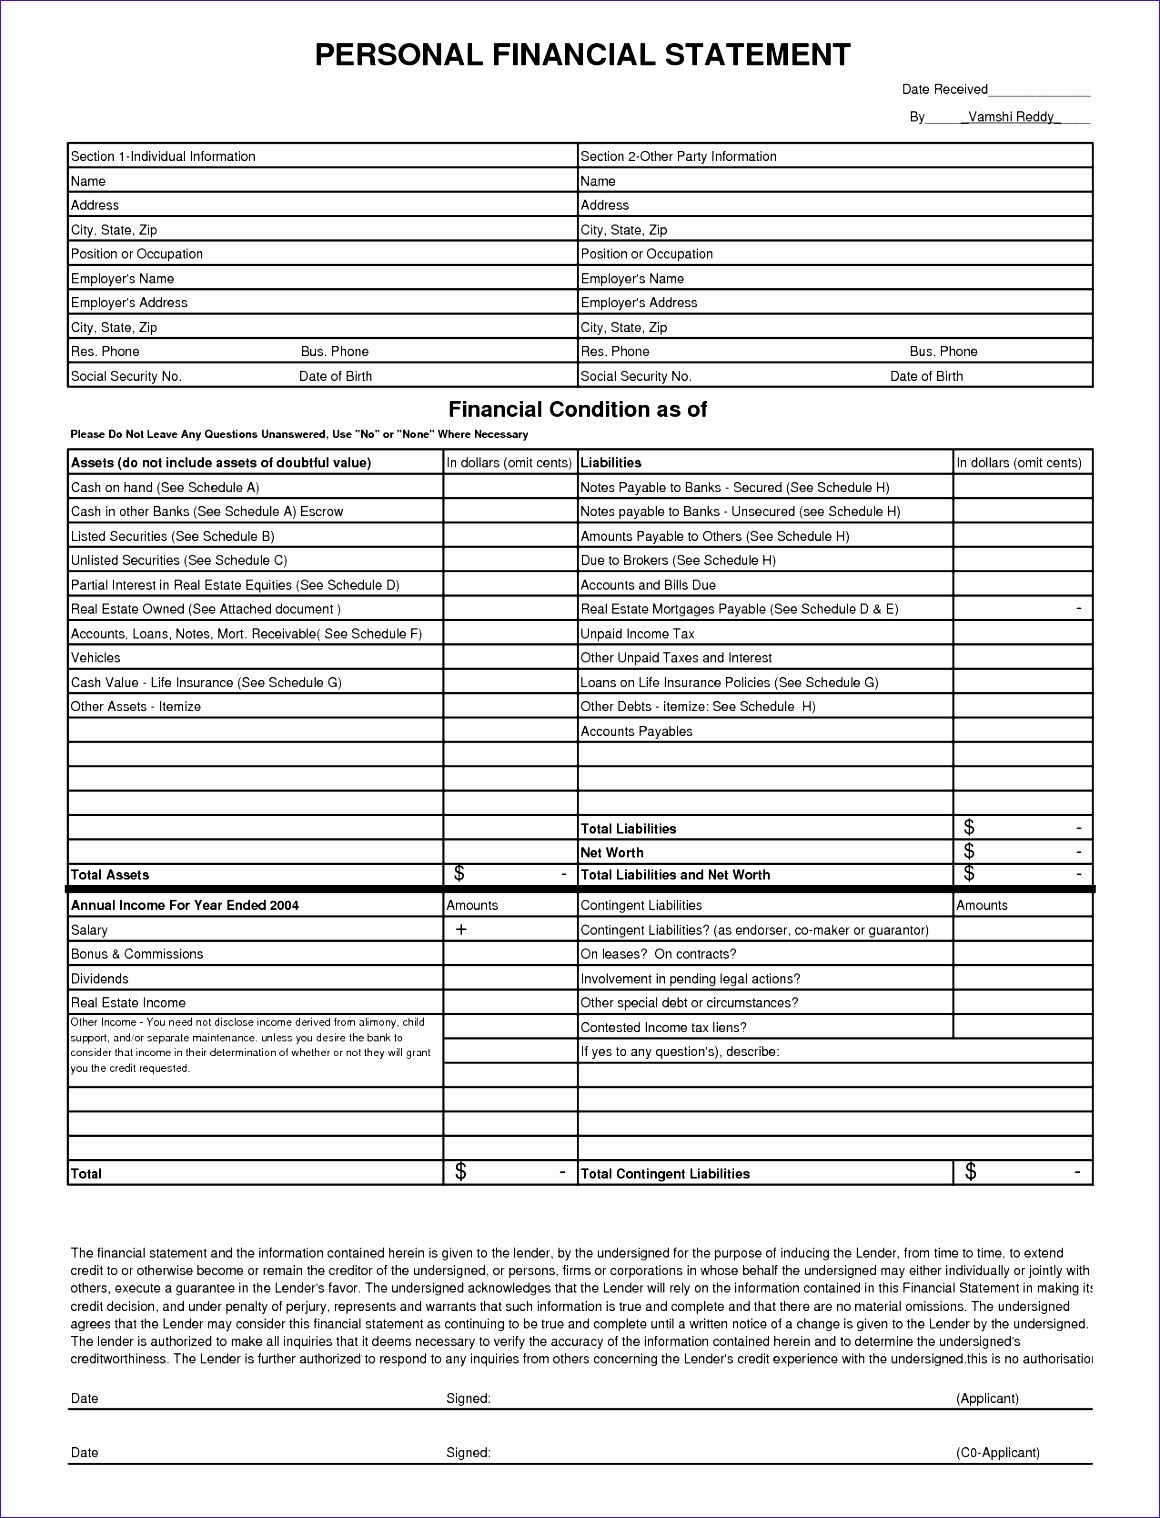 Profit Loss Statement Template Excel Best Of 9 Excel Financial Templates Exceltemplates Exceltemplates